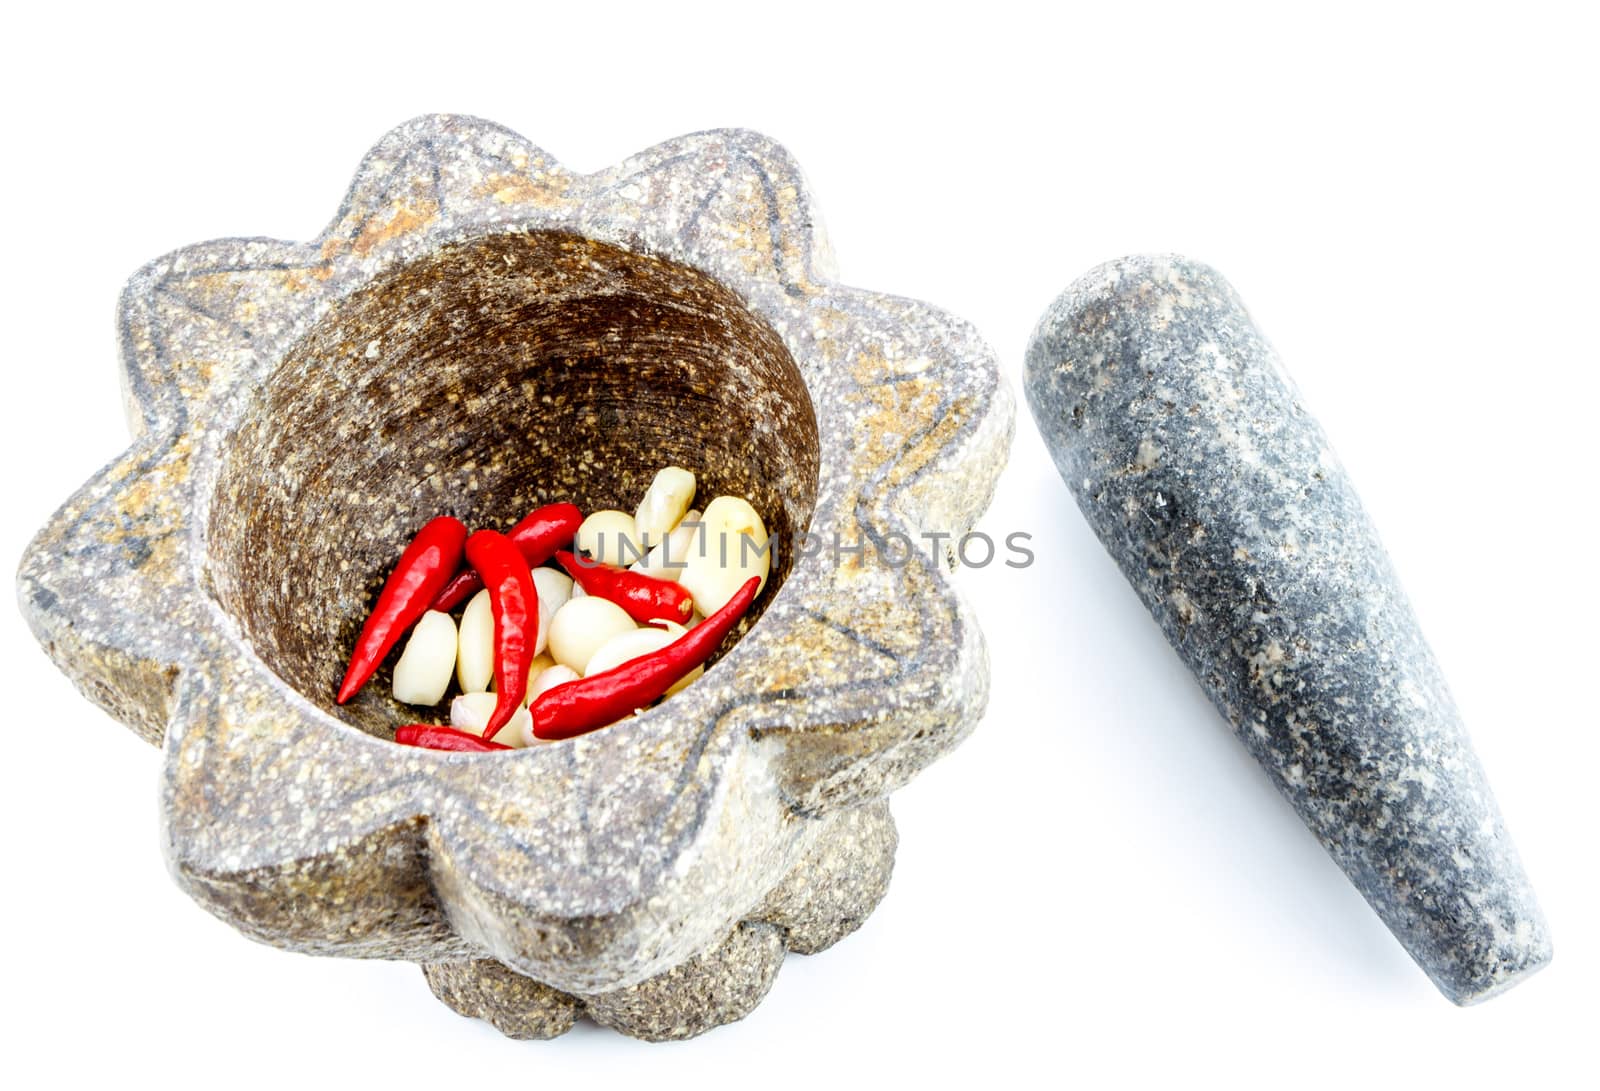 garlic and red chili pepper in stone mortar on white background by bunwit